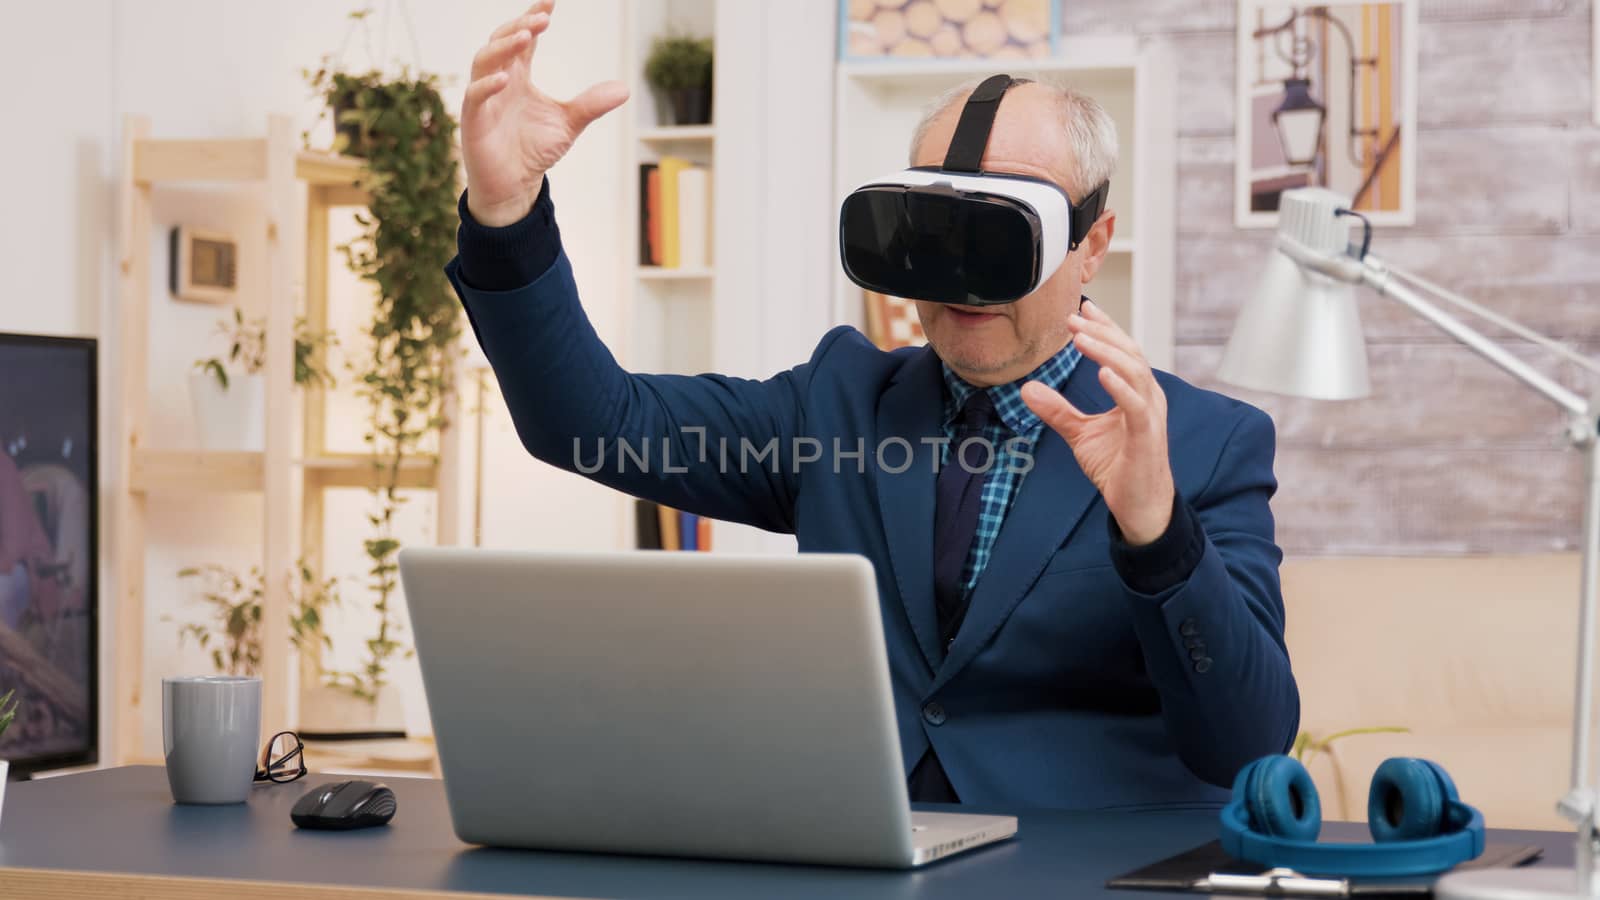 Retired man experiencing virtual reality using vr headset in living room. Cup of coffee on the table.